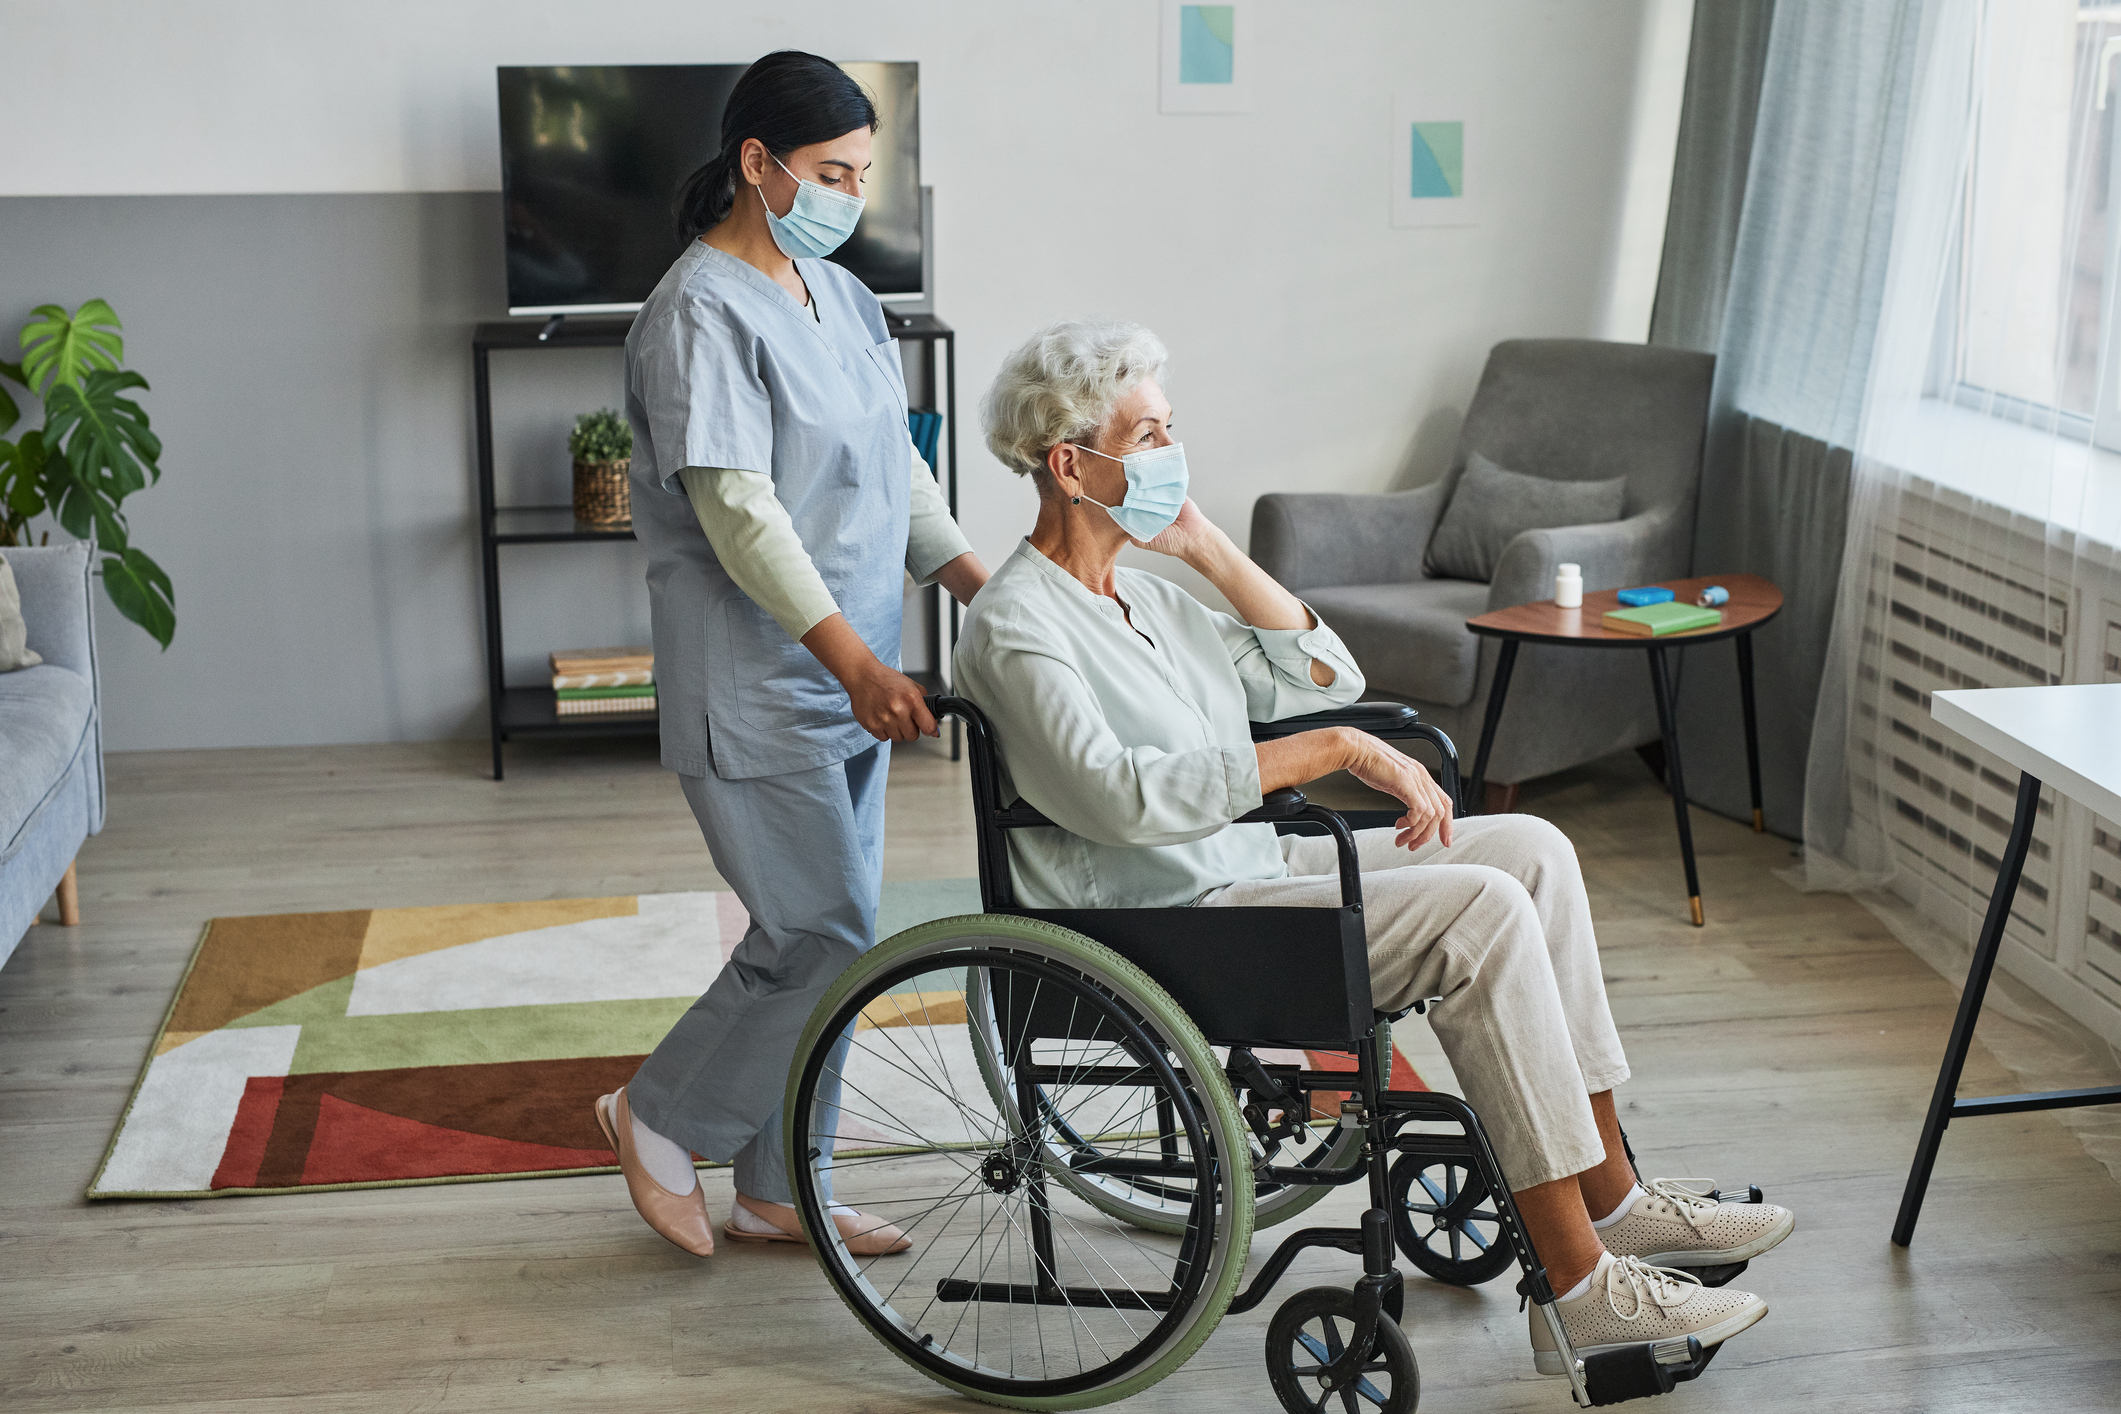 Elderly female on a wheel chair being pushed by  young female  carer in room